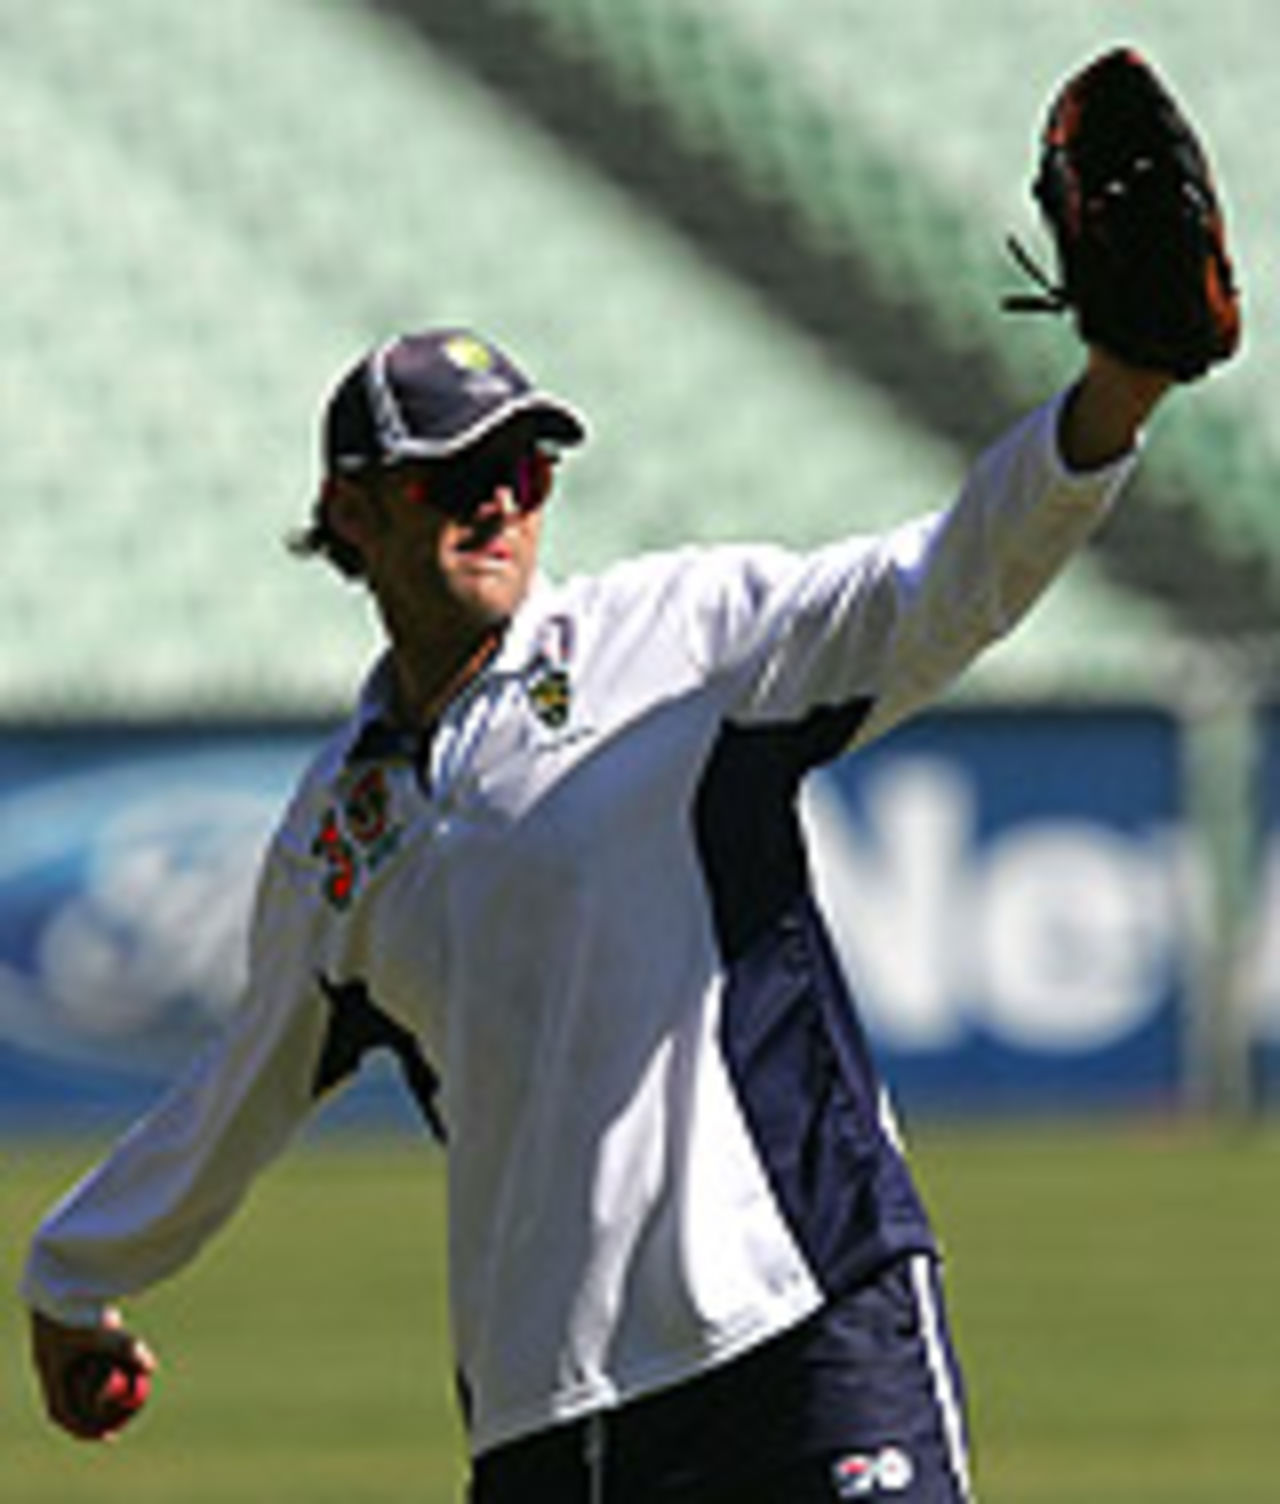 Adam Gilchrist trains before the second Test, December 23, 2004